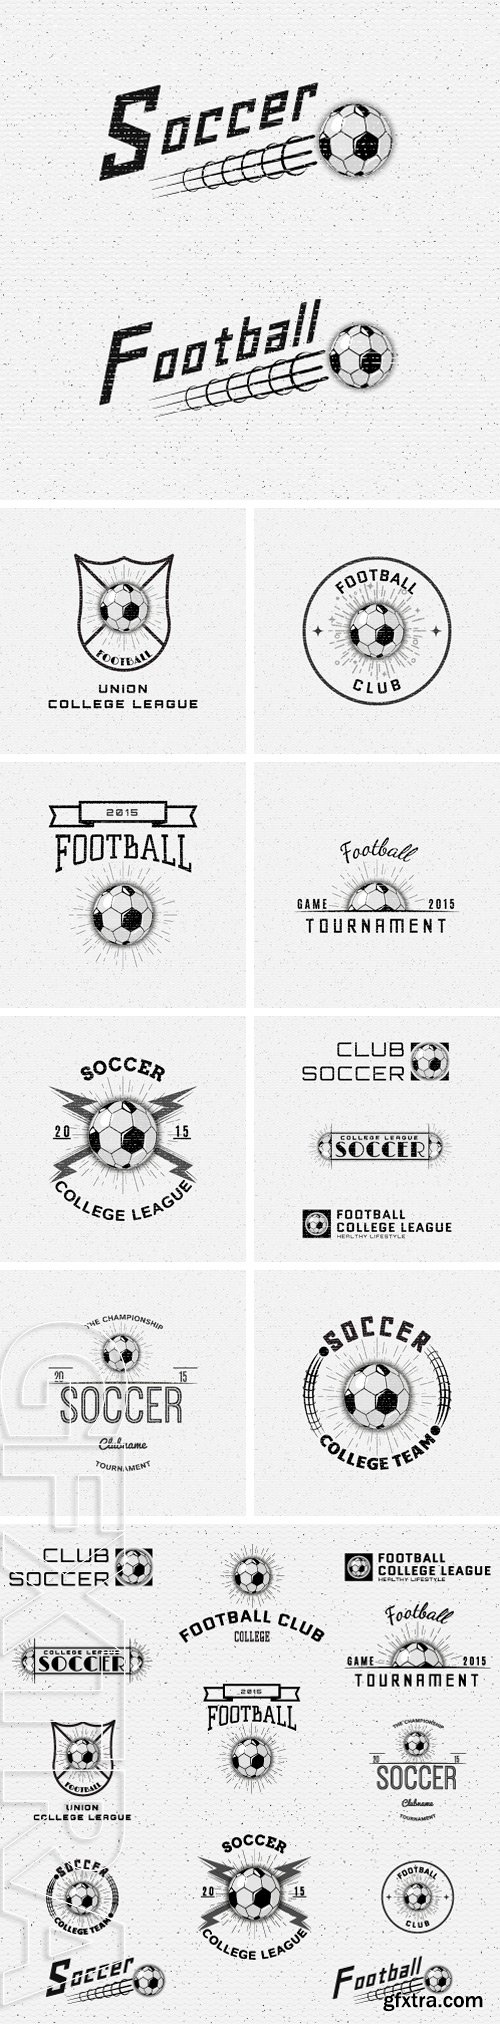 Stock Vectors - Soccer badges logos and labels can be used for design, presentations, brochures, flyers, sports equipment, corporate identity, sales